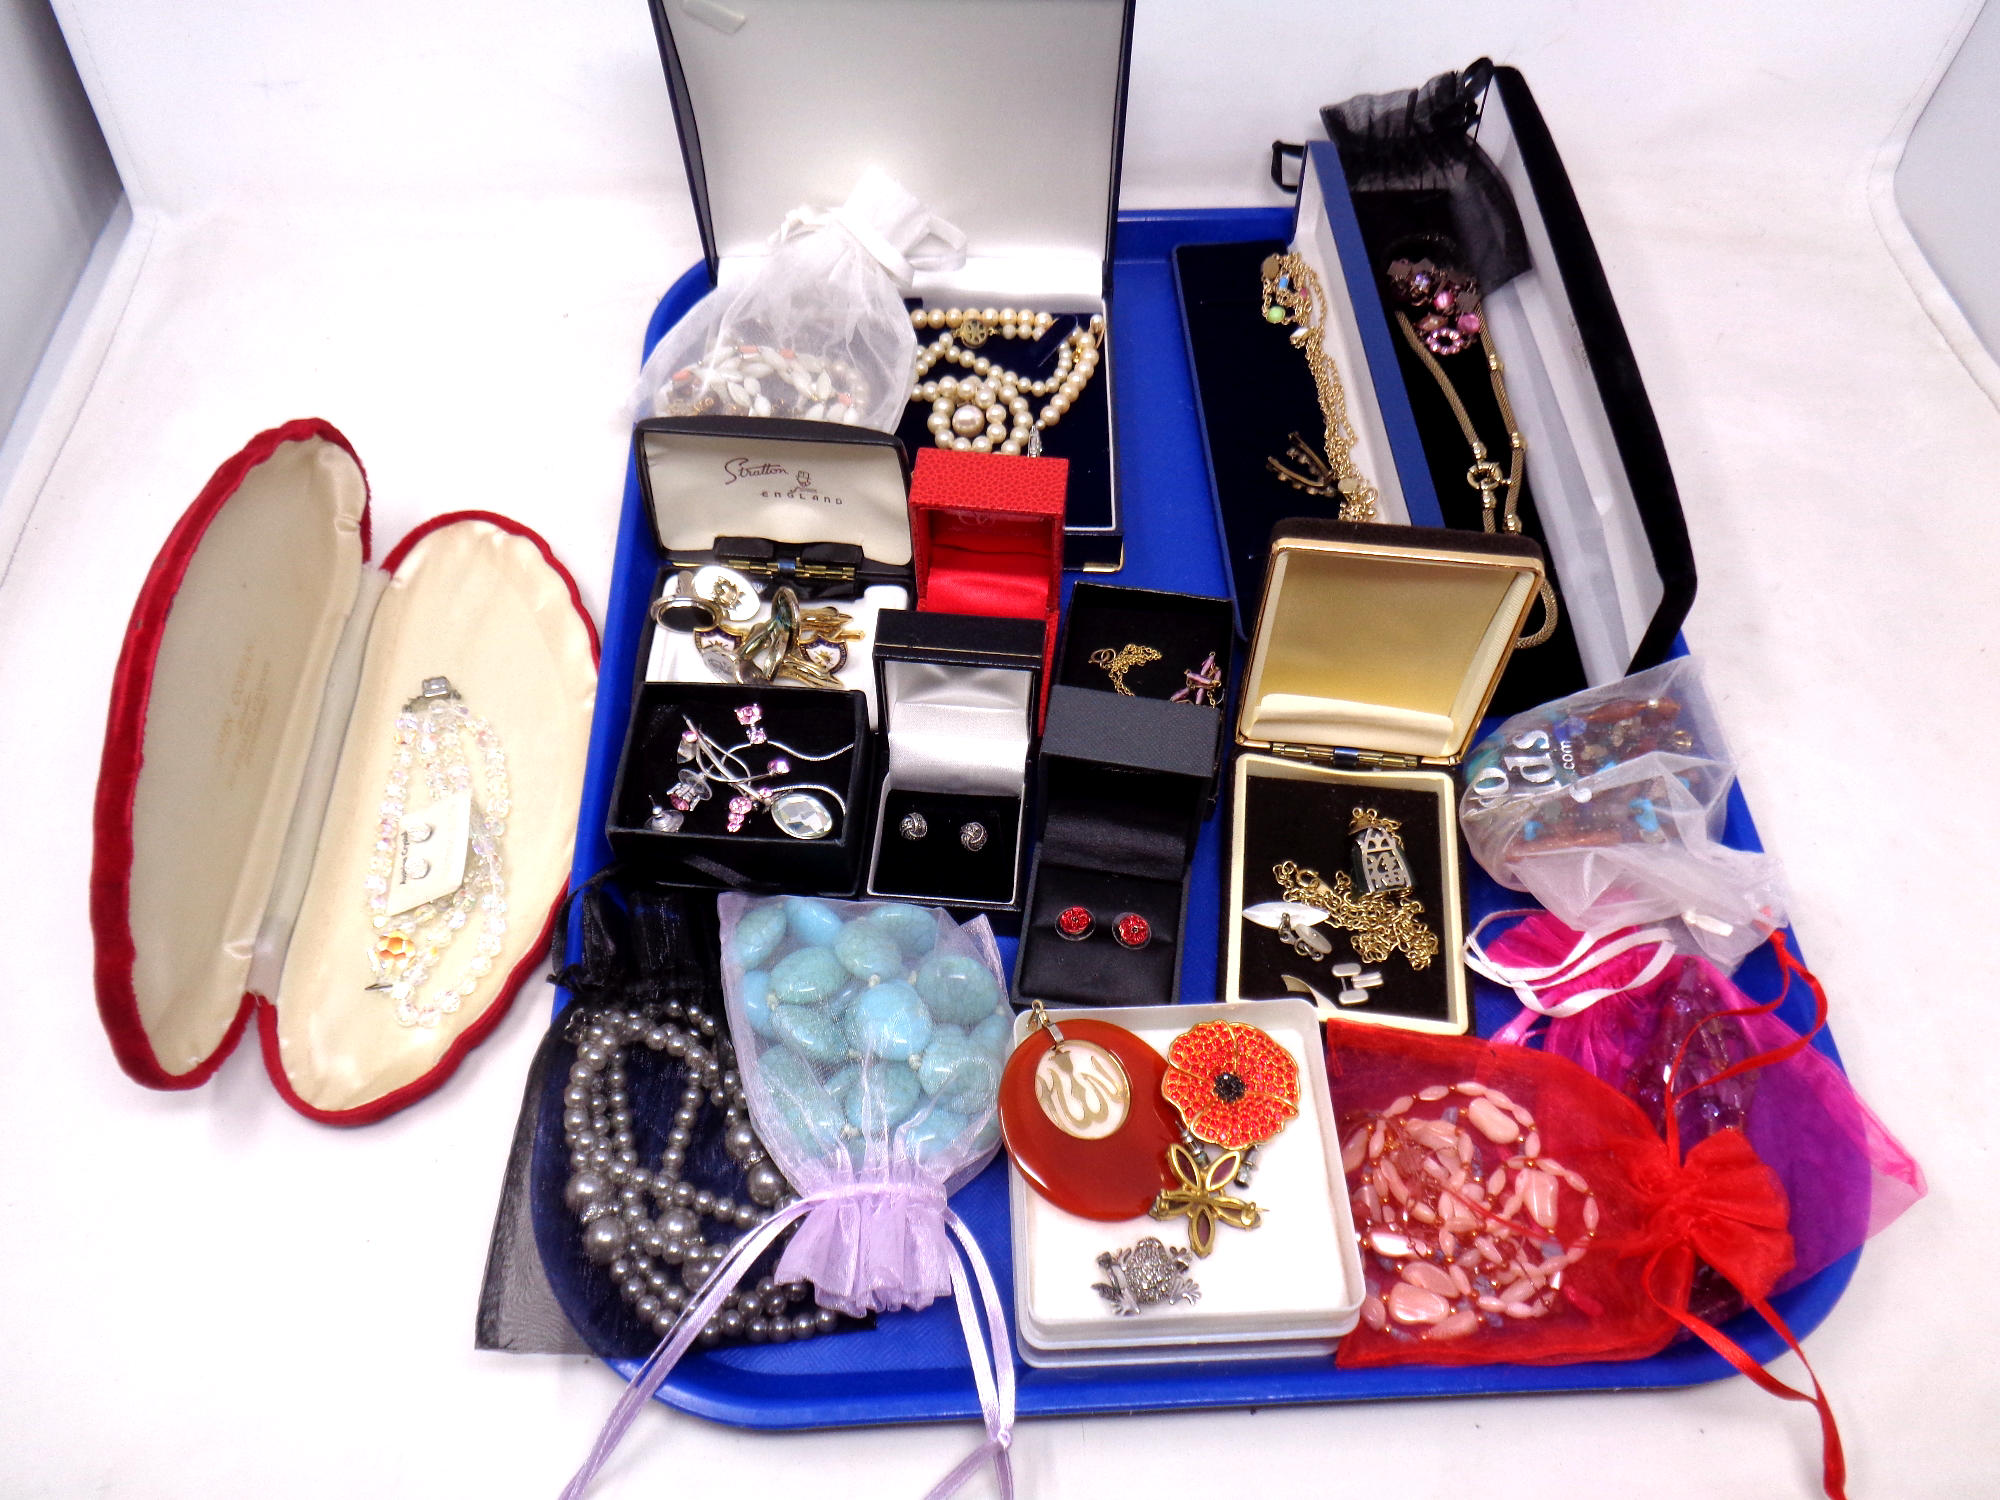 A tray of costume jewellery including earrings, pendants, simulated pearls,